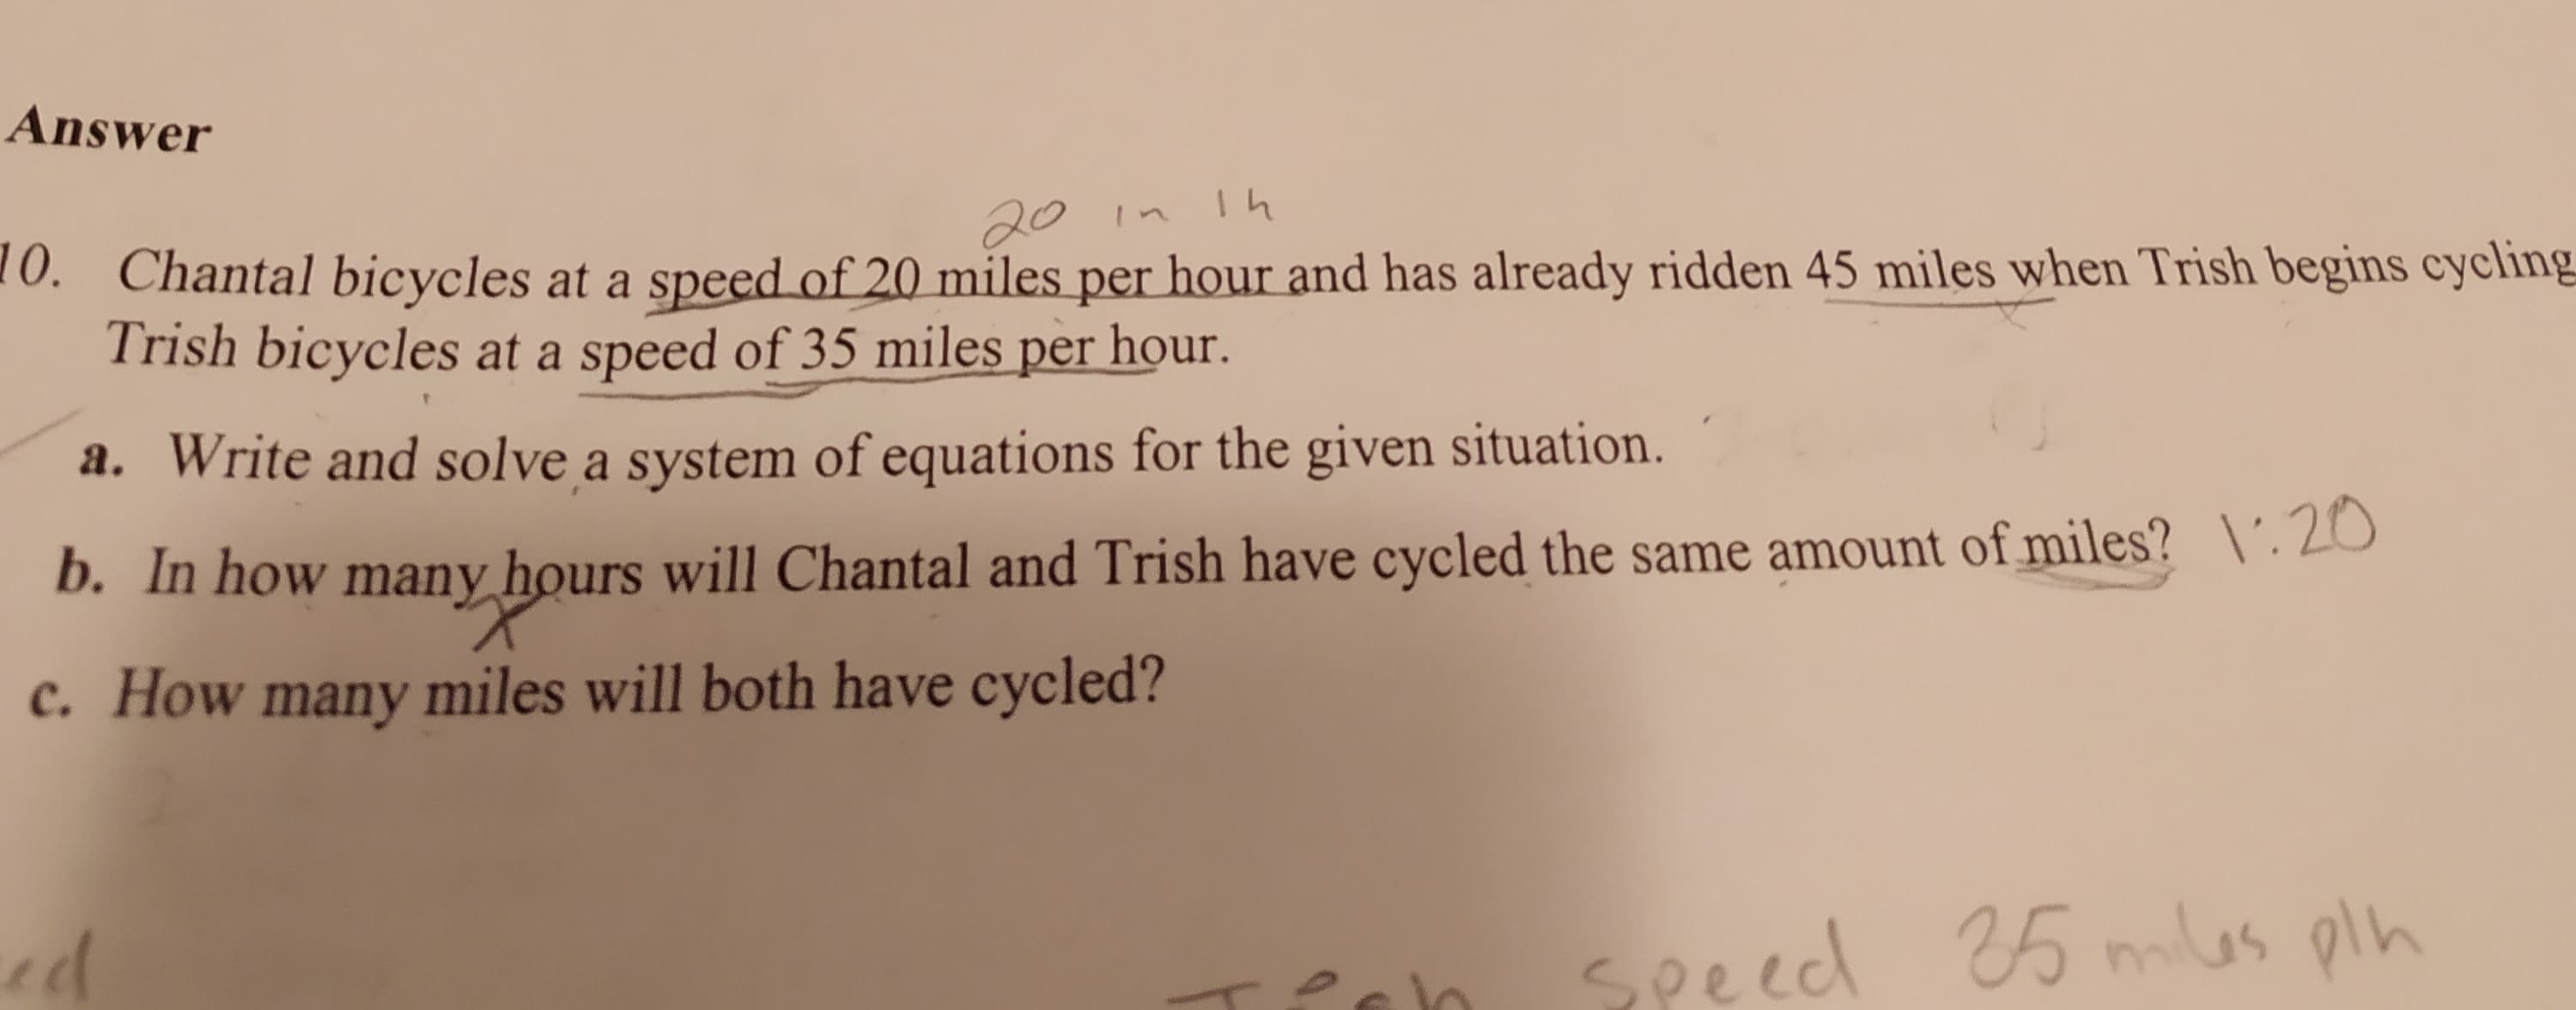 Answer
20 in Ih
0. Chantal bicycles at a speed of 20 miles per hour and has already ridden 45 miles when Trish begins cycling
Trish bicycles at a speed of 35 miles per hour.
a. Write and solve a system of equations for the given situation.
b. In how many hours will Chantal and Trish have cycled the same amount of miles? \'.20
c. How many miles will both have cycled?
ed
seeed
25 mlas oln
